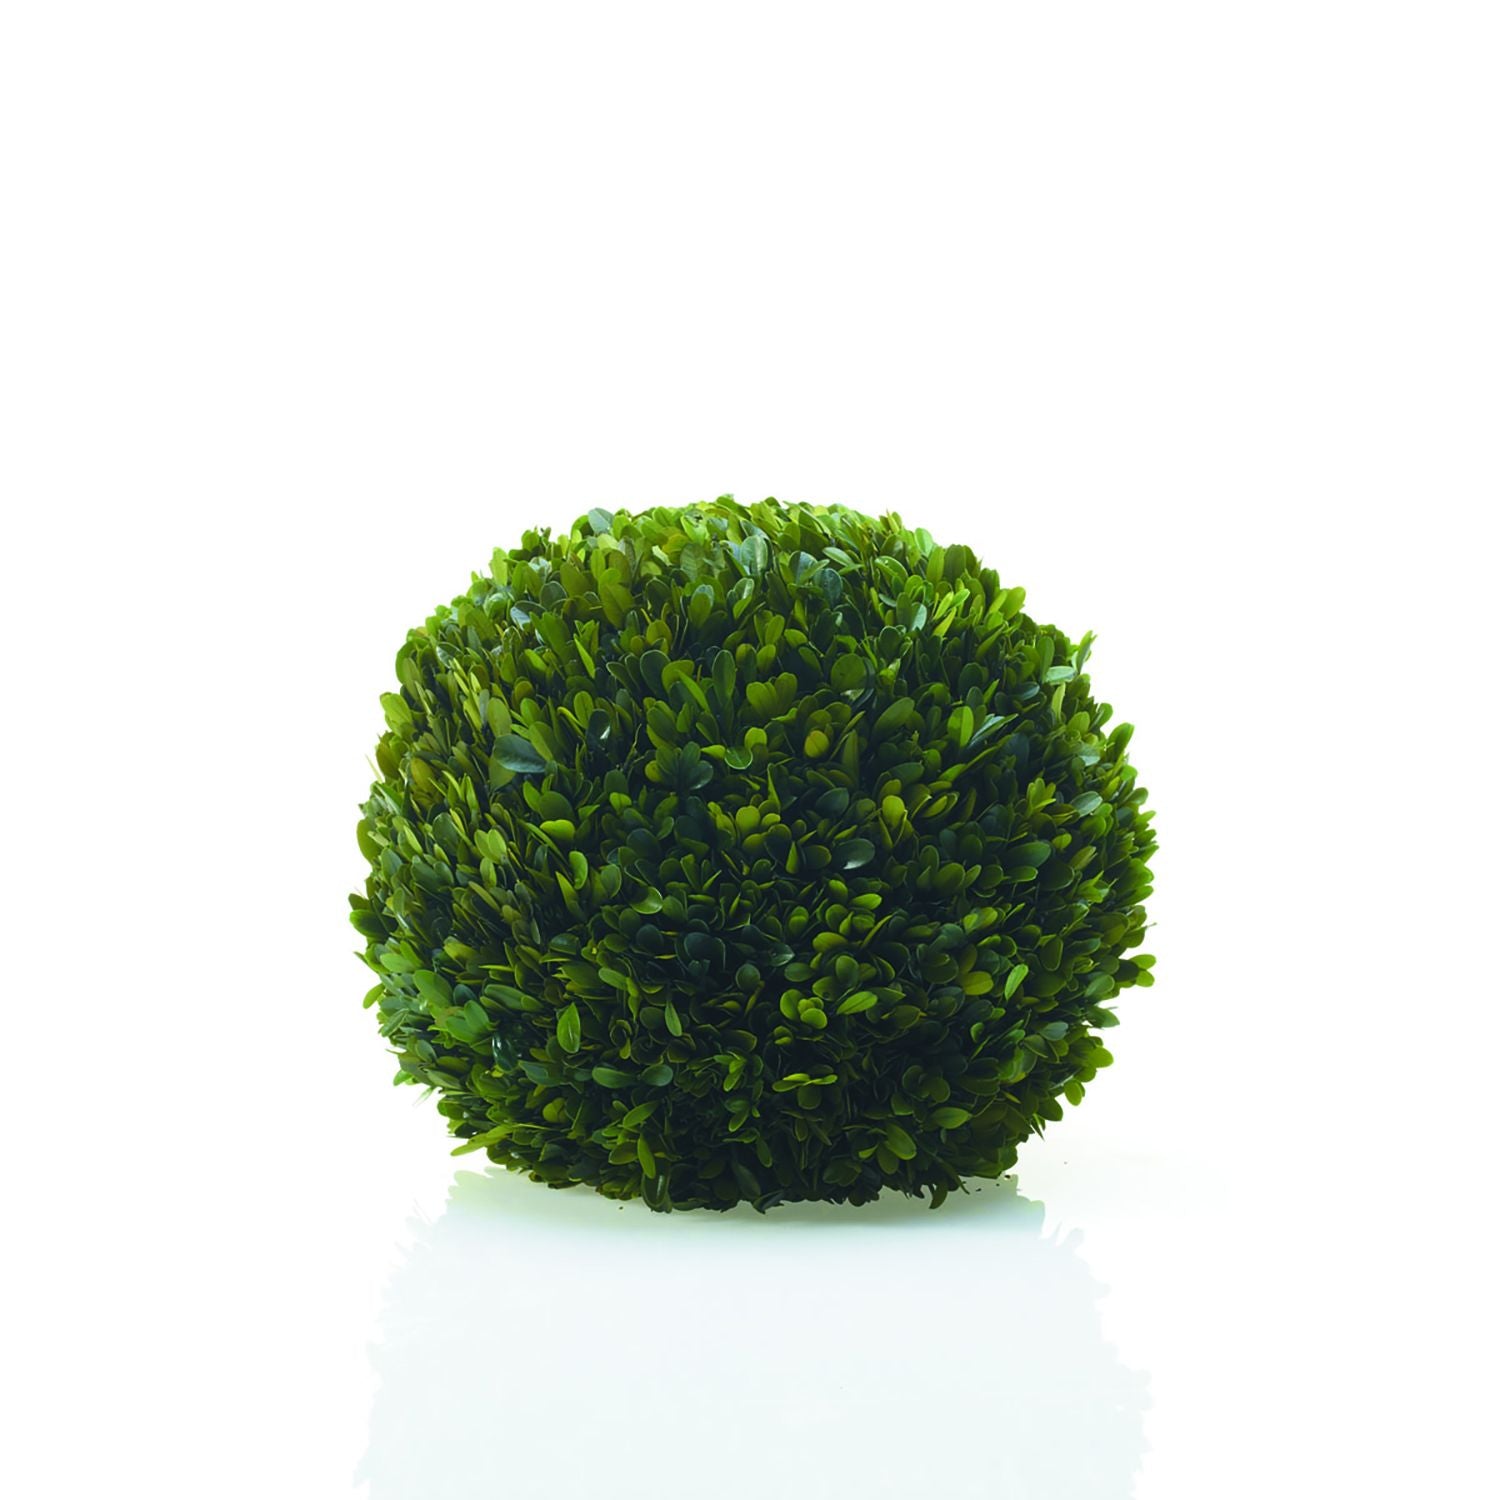 A masterful artist has painstakingly assembled an Accent Decor Preserved Boxwood Sphere on a white background.